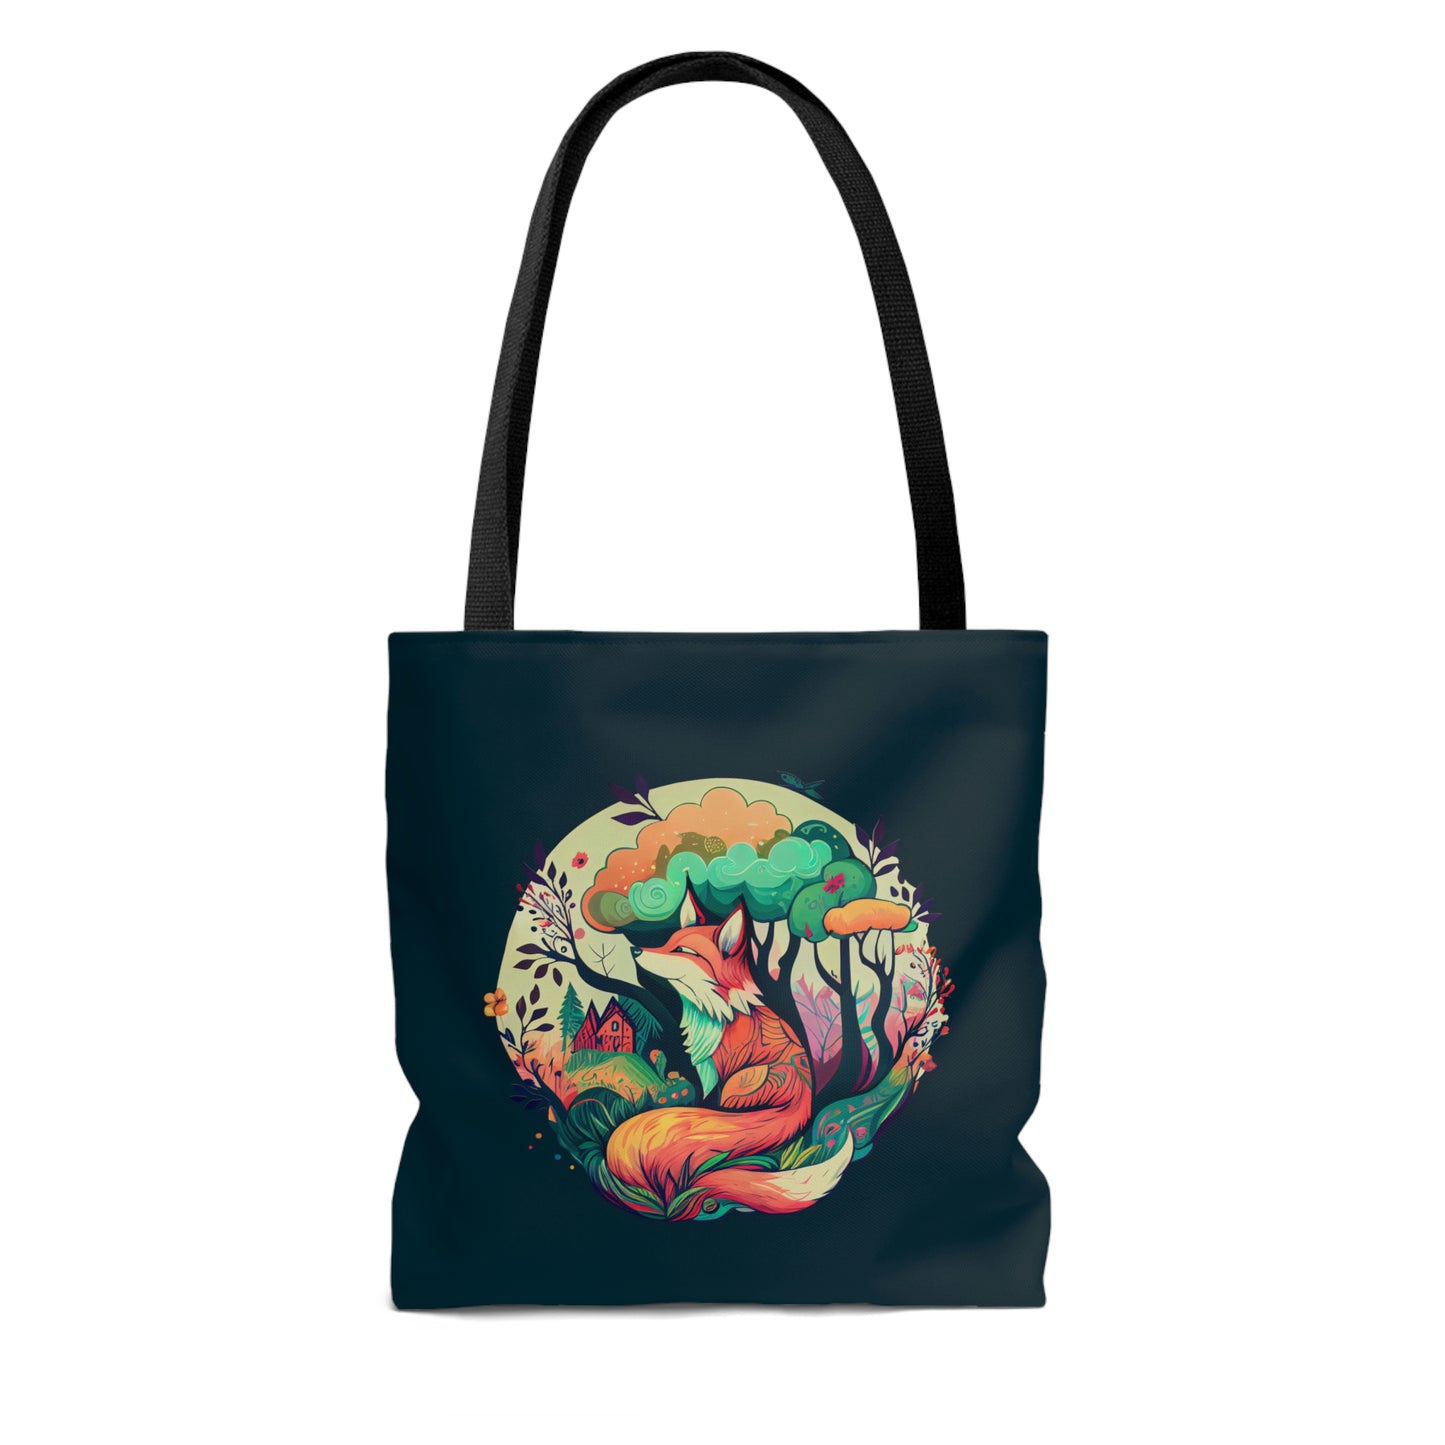 Fox Lovers Gift, Dual Side Printed, Canvas Book Bag, Field Bag, School Gift - S-M-Large Canvas Tote Bag